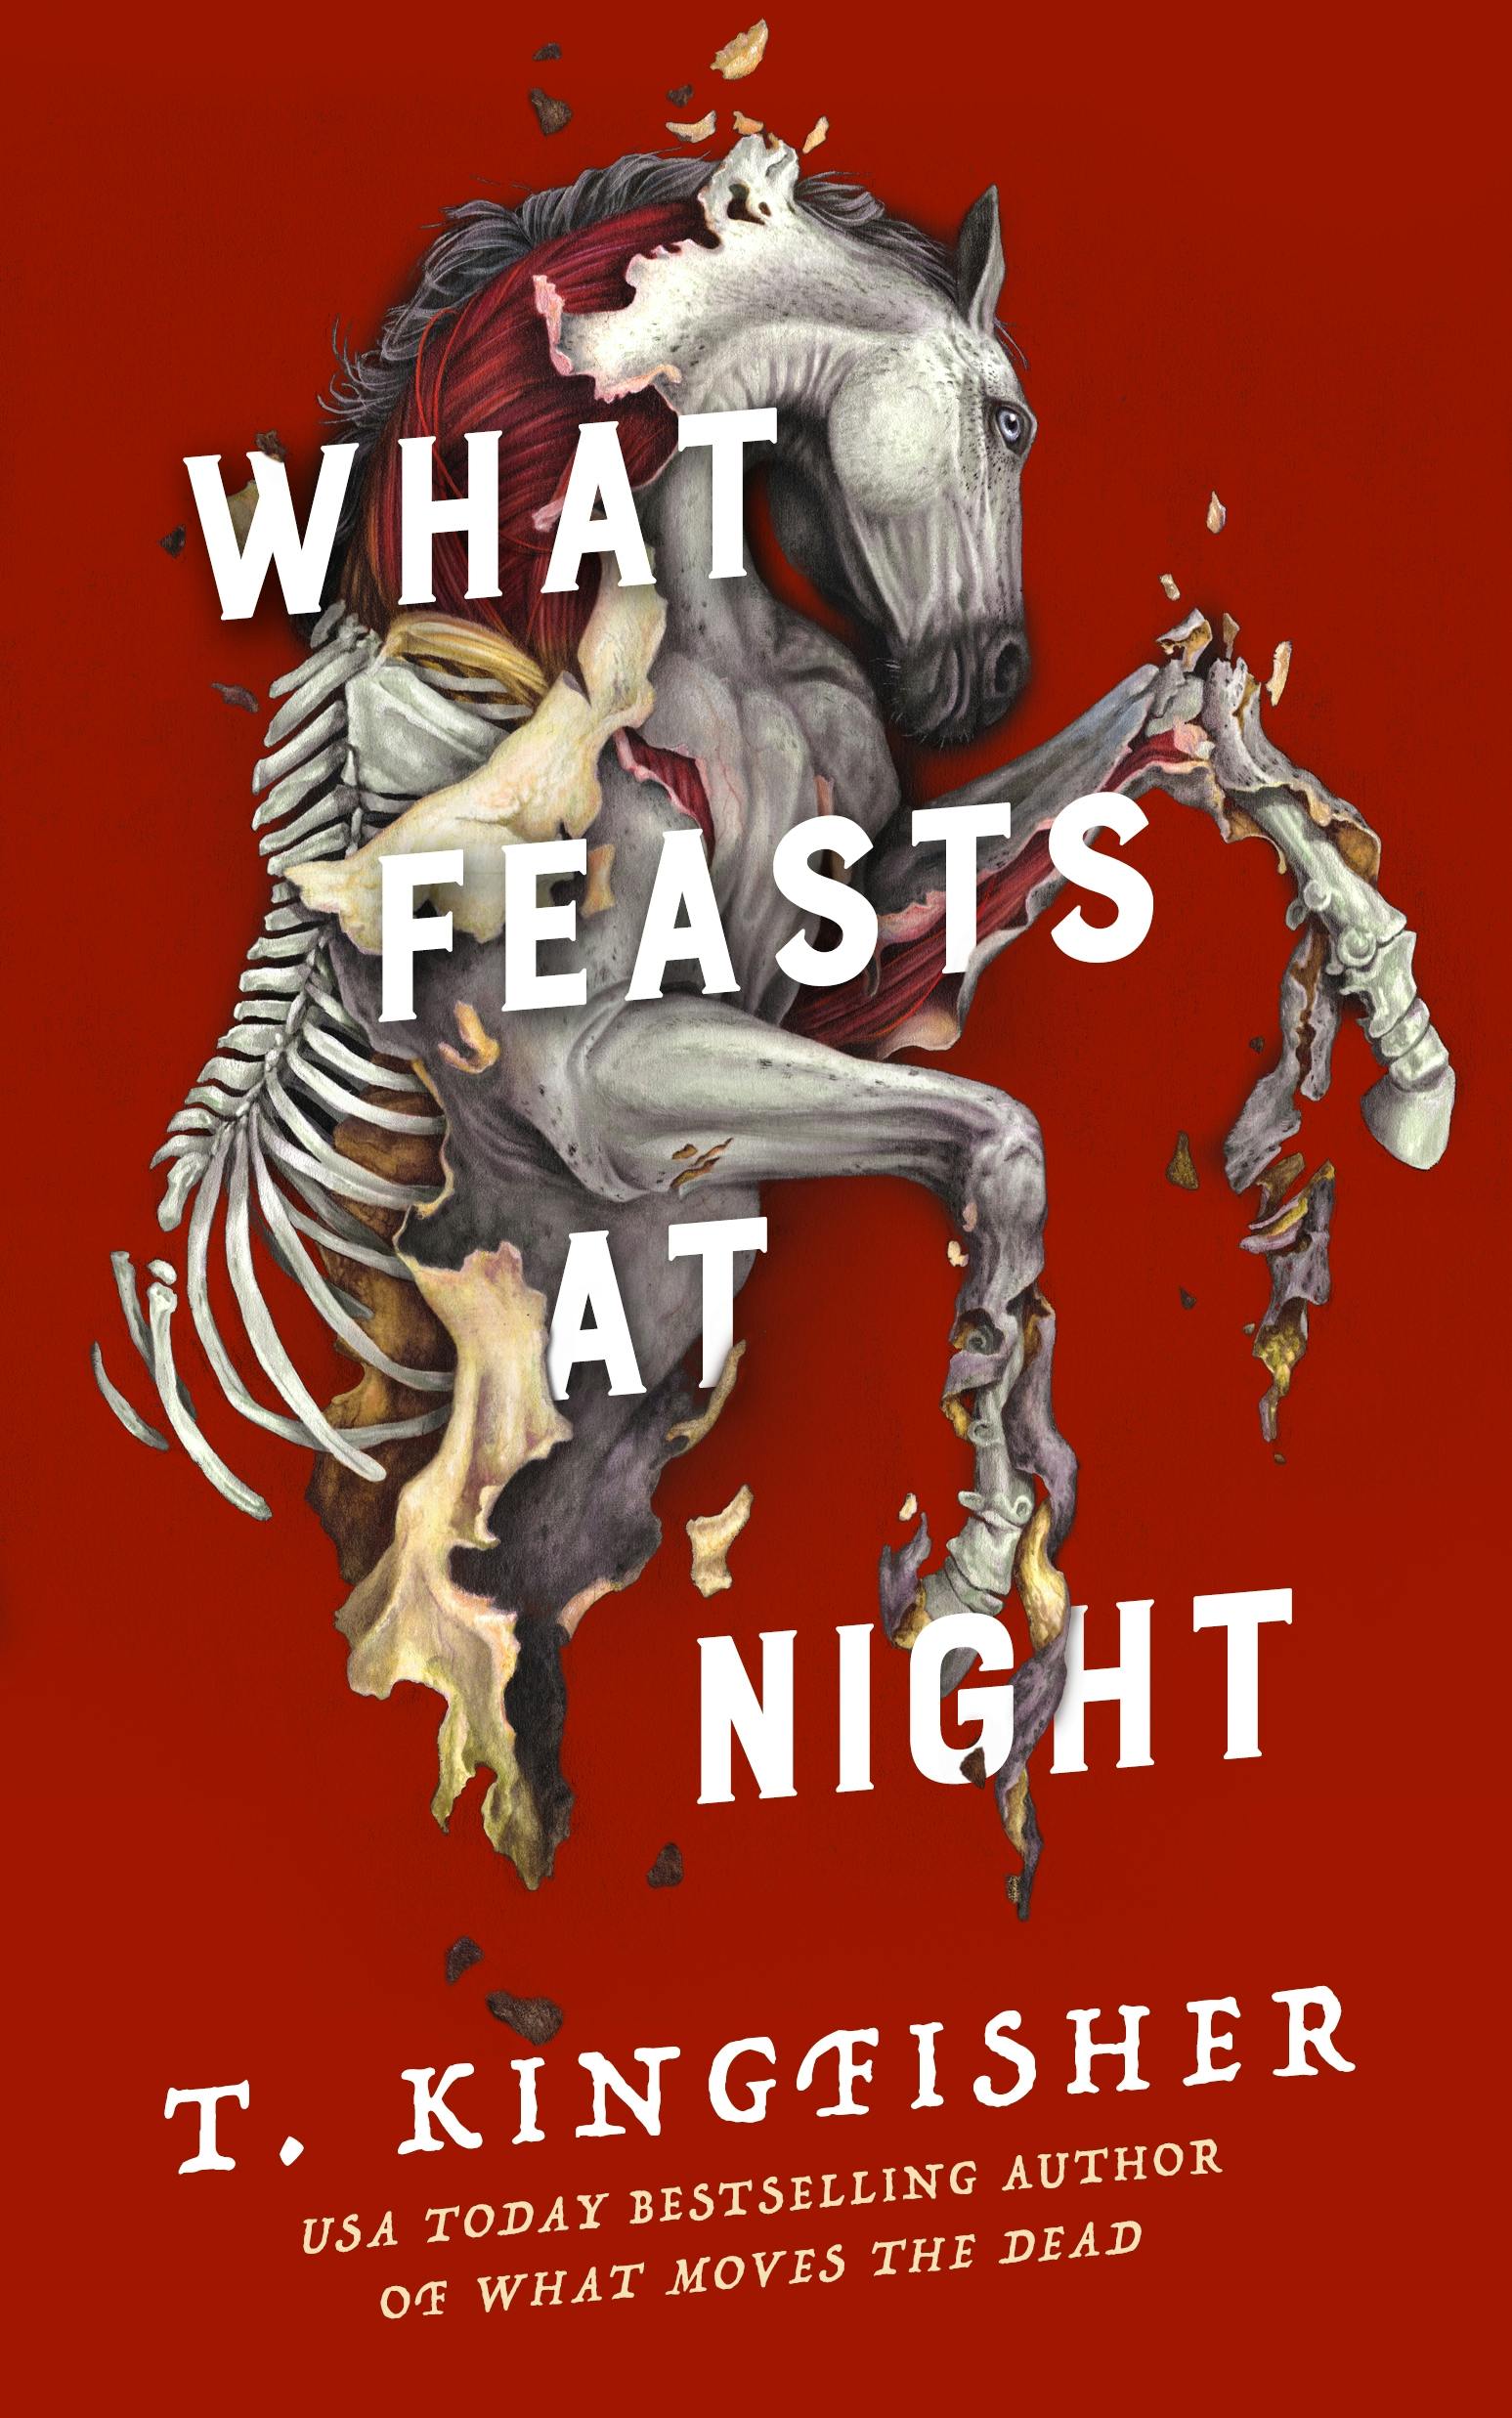 Cover for the book titled as: What Feasts at Night